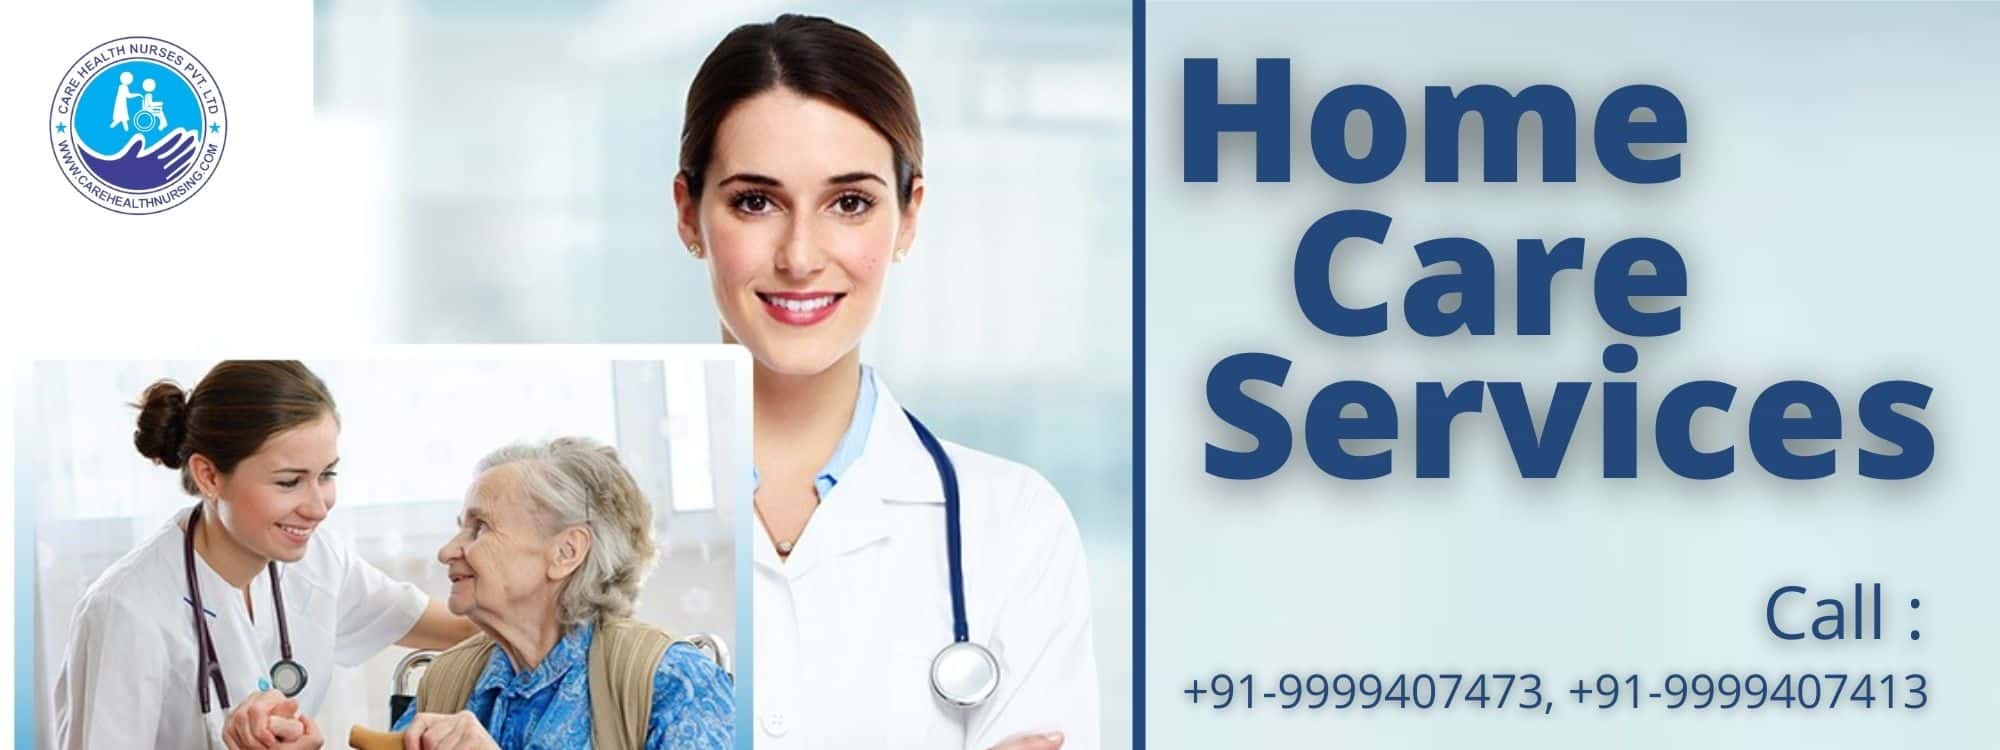 Home care solutions|Health agencies|in home care|home health care services